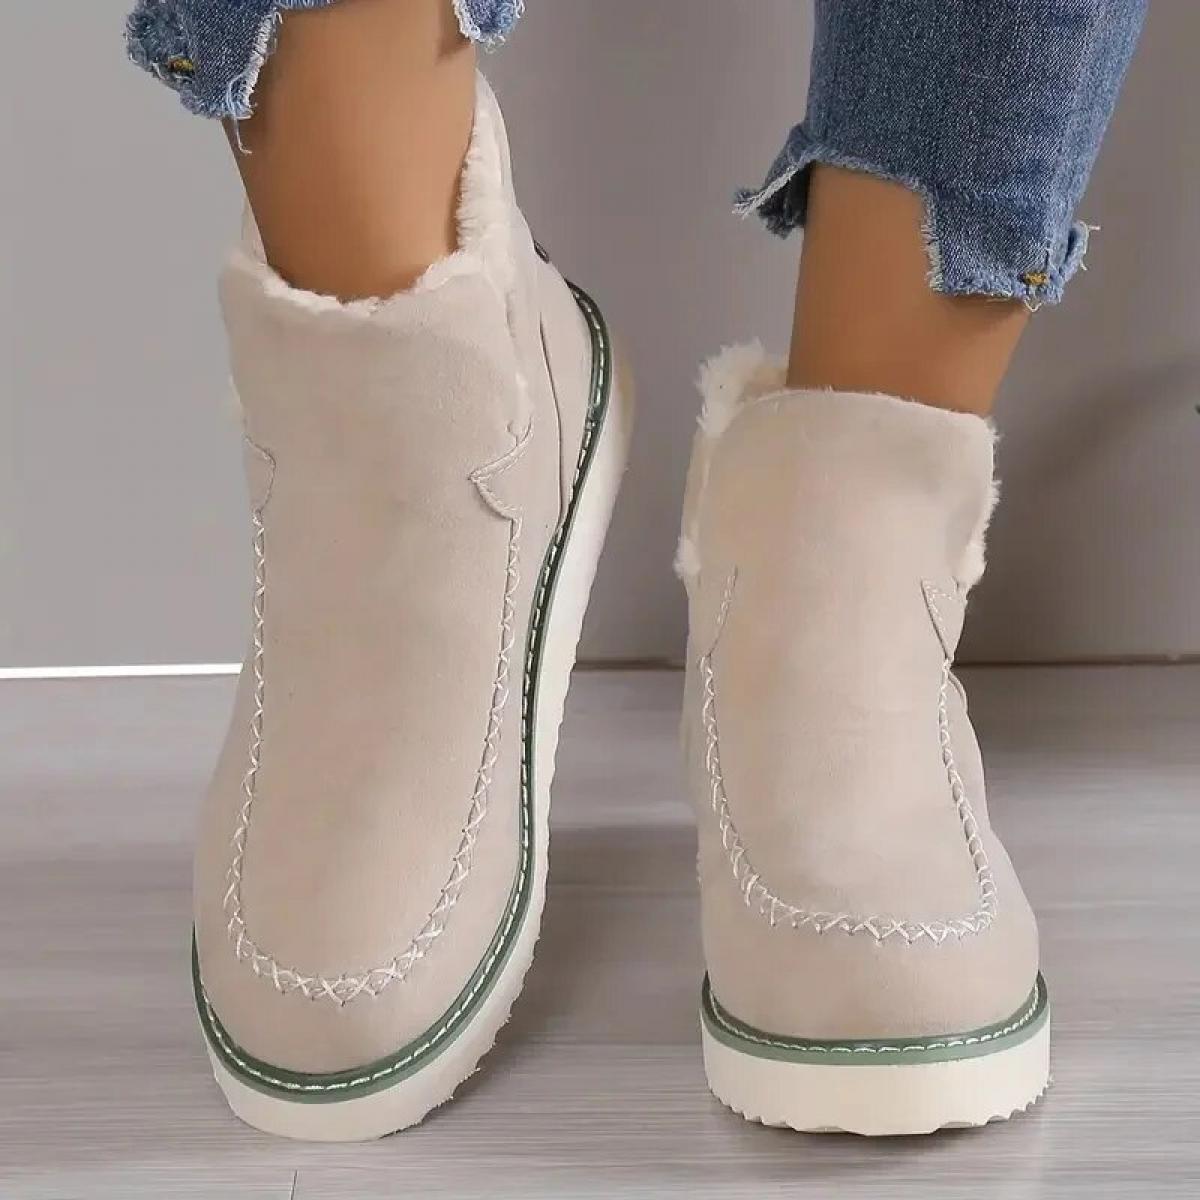 Women's Winter Boots Fashion Snow Boots Casual Leather Boots Cotton Ladies Boots Boots Platform Shoes Botines Mujer Shoe